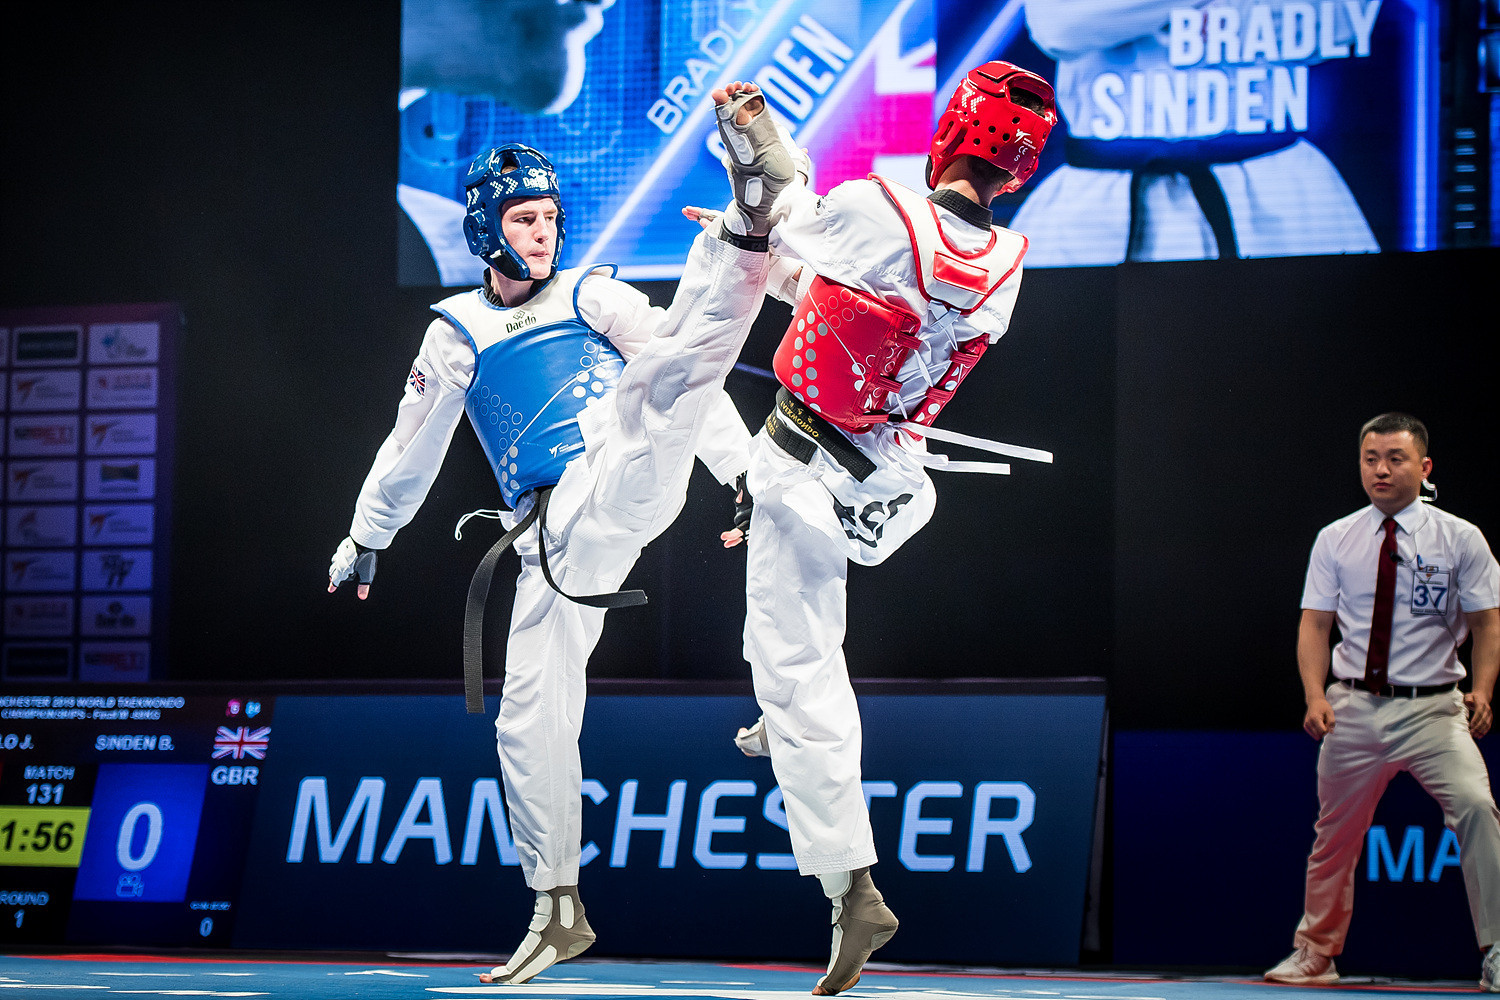 The awarding of the 2022 European Taekwondo Championships to Manchester comes just a month after the city staged the first-ever World Championships held in Great Britain ©World Taekwondo